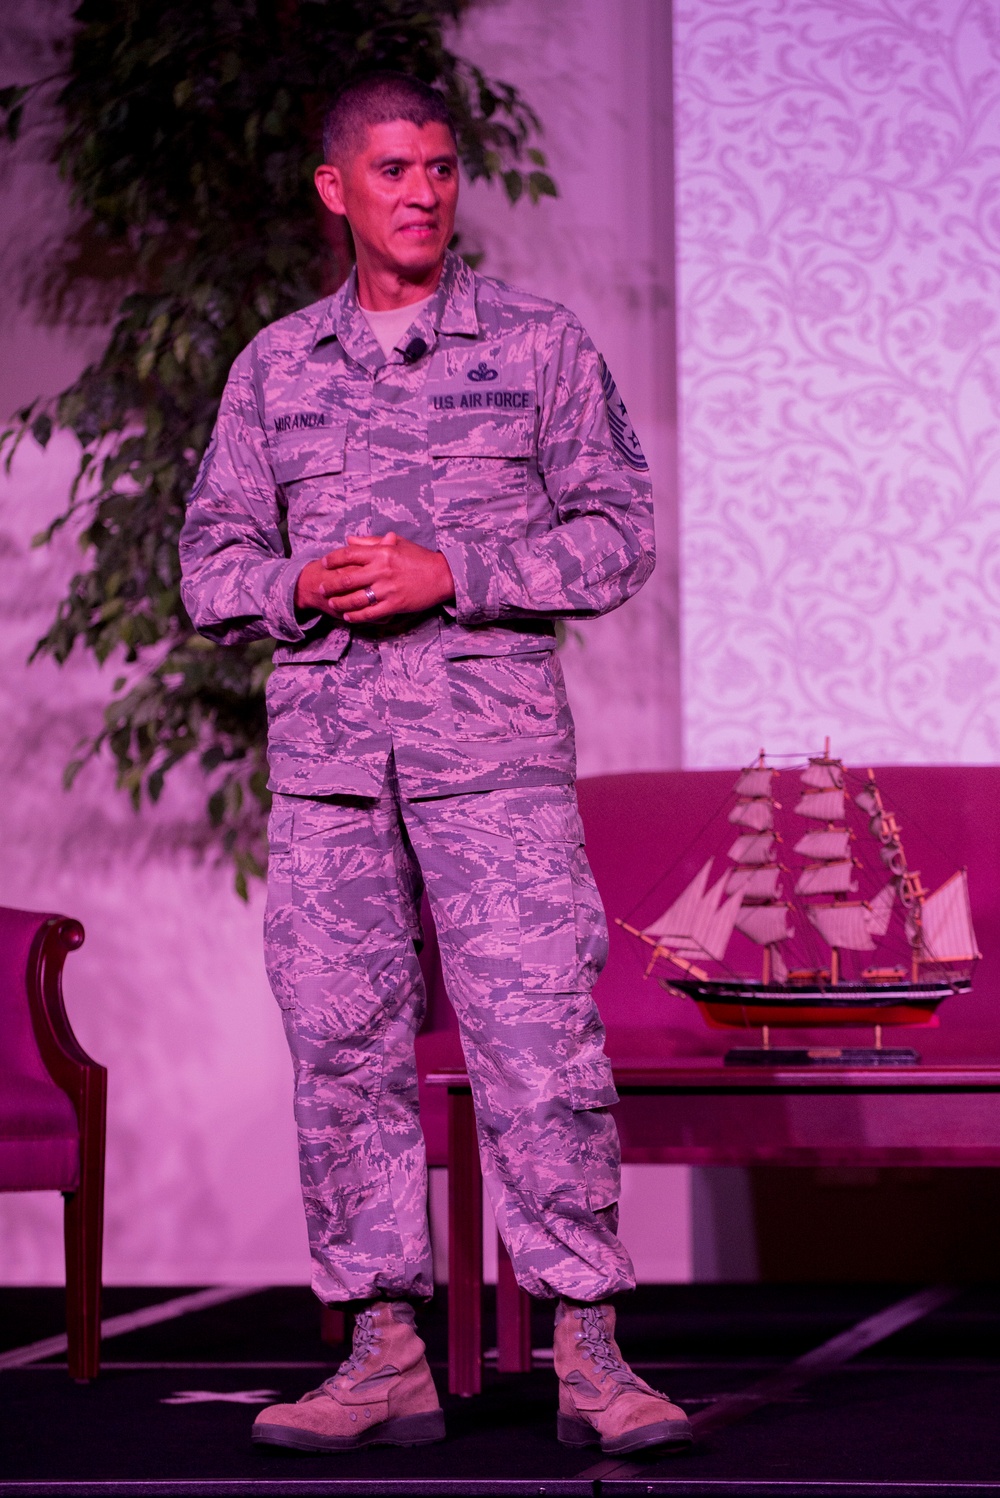 Storytellers: &quot;Every Airman has a Story&quot;